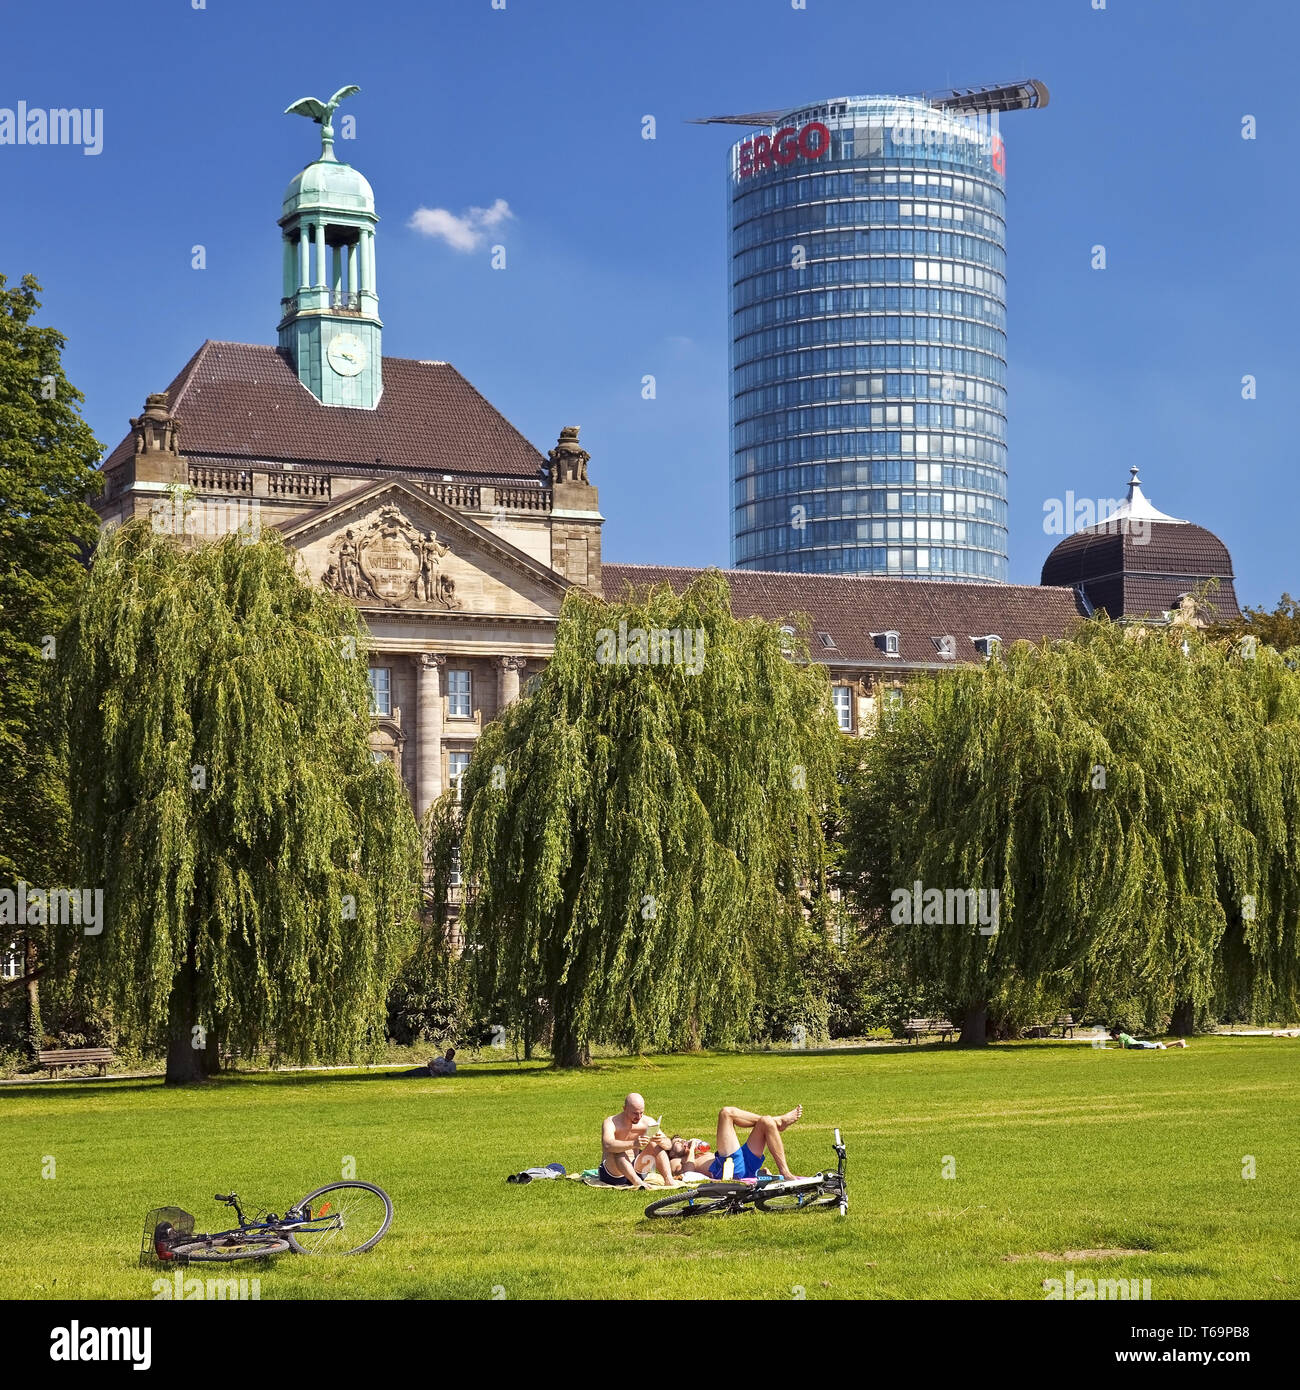 rhine meadow in front of the legislature building and the Ergo office tower, Duesseldorf, Germany Stock Photo